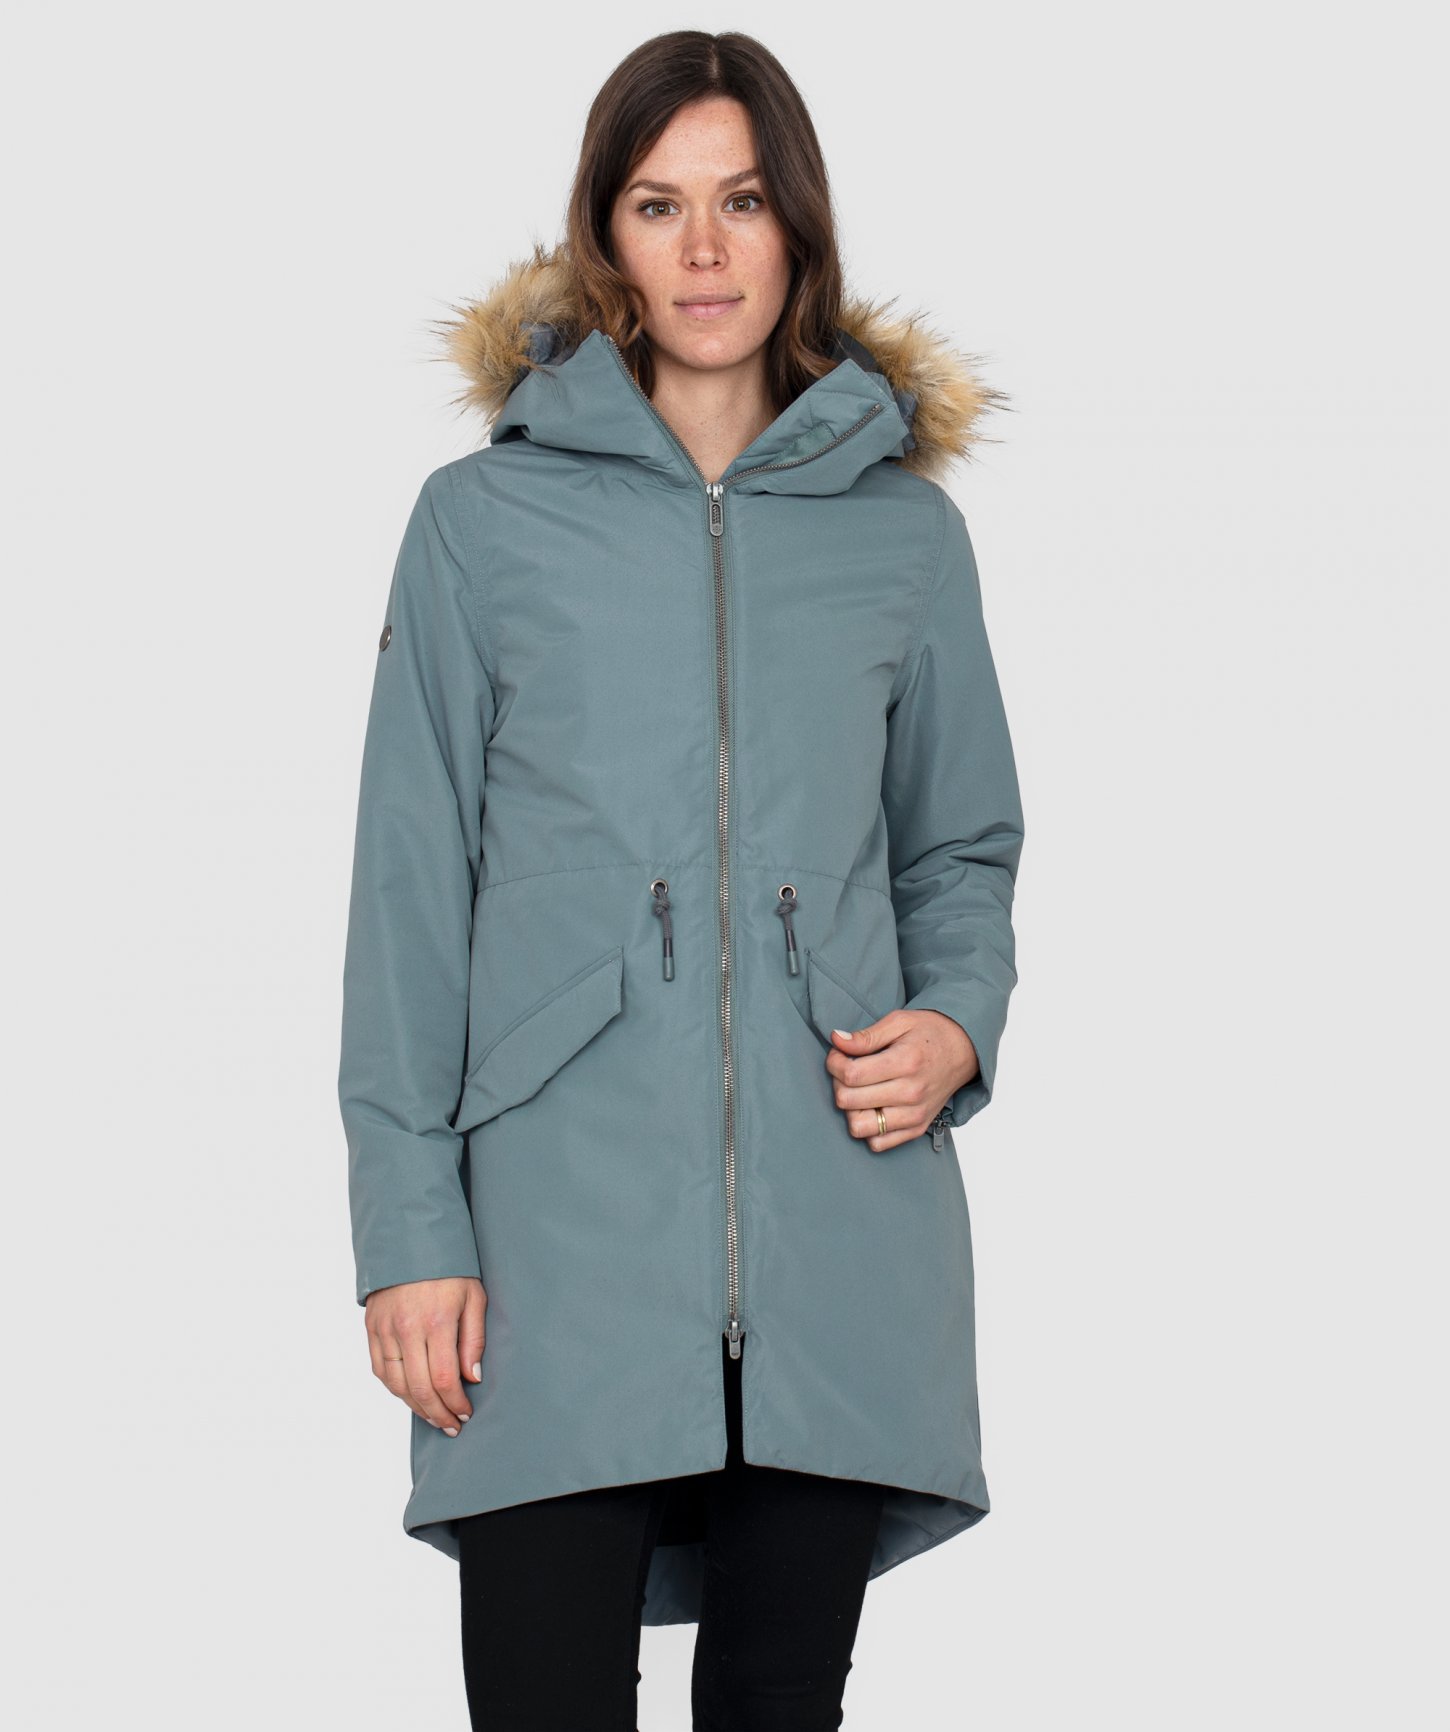 Parka Ventus Calida Stormy Weather Chica